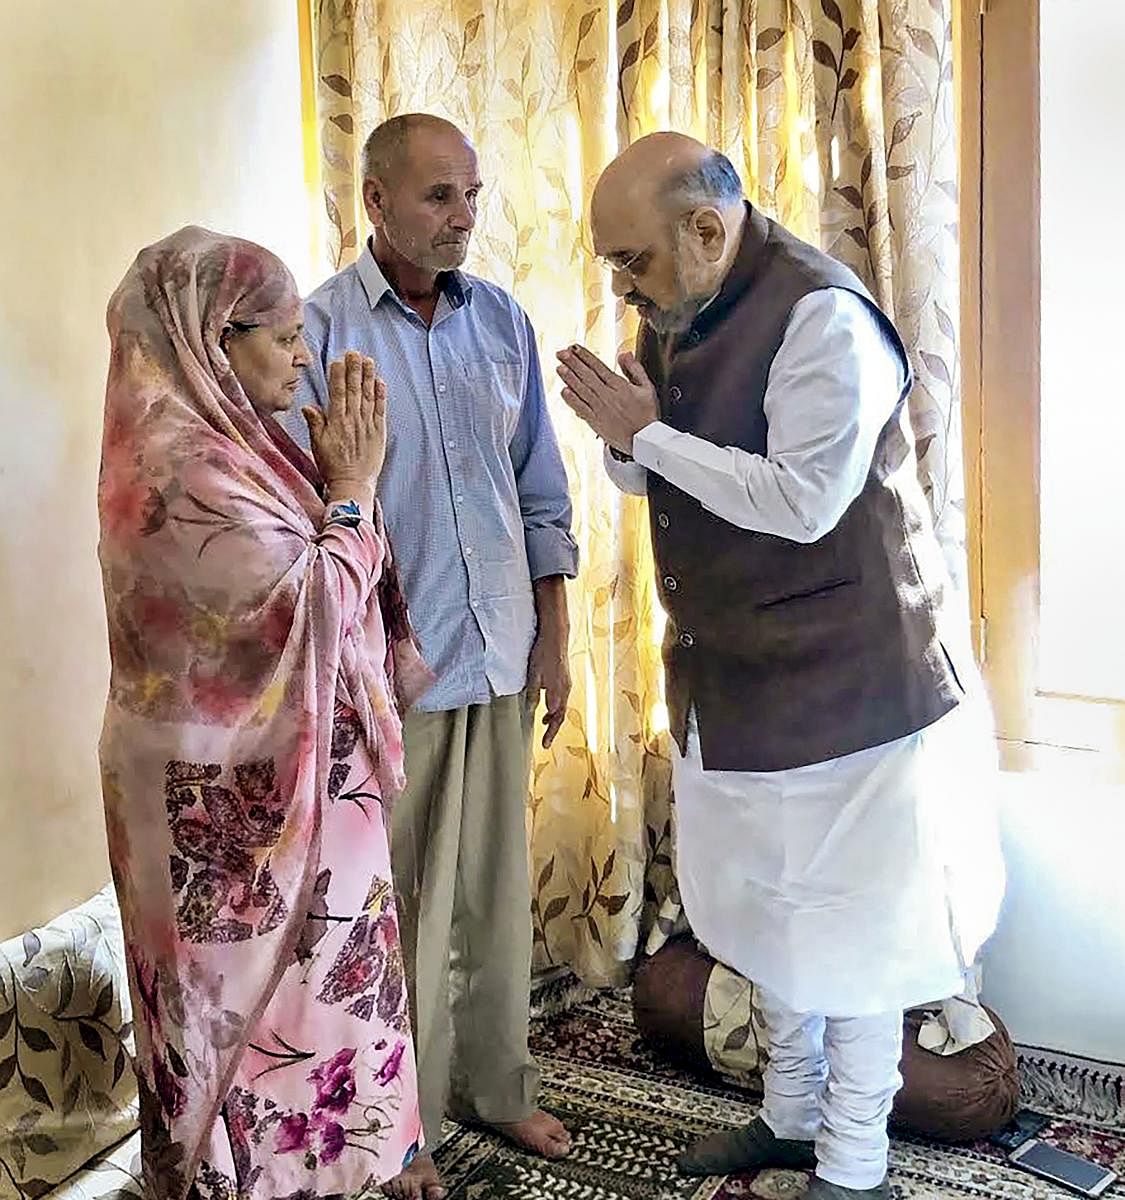 Union Home Minister Amit Shah visits the family of Jammu and Kashmir Police inspector Arshad Ahmed Khan, in Srinagar, on June 27, 2019. Khan was killed in a terror attack in Anantnag on June 12. PTI